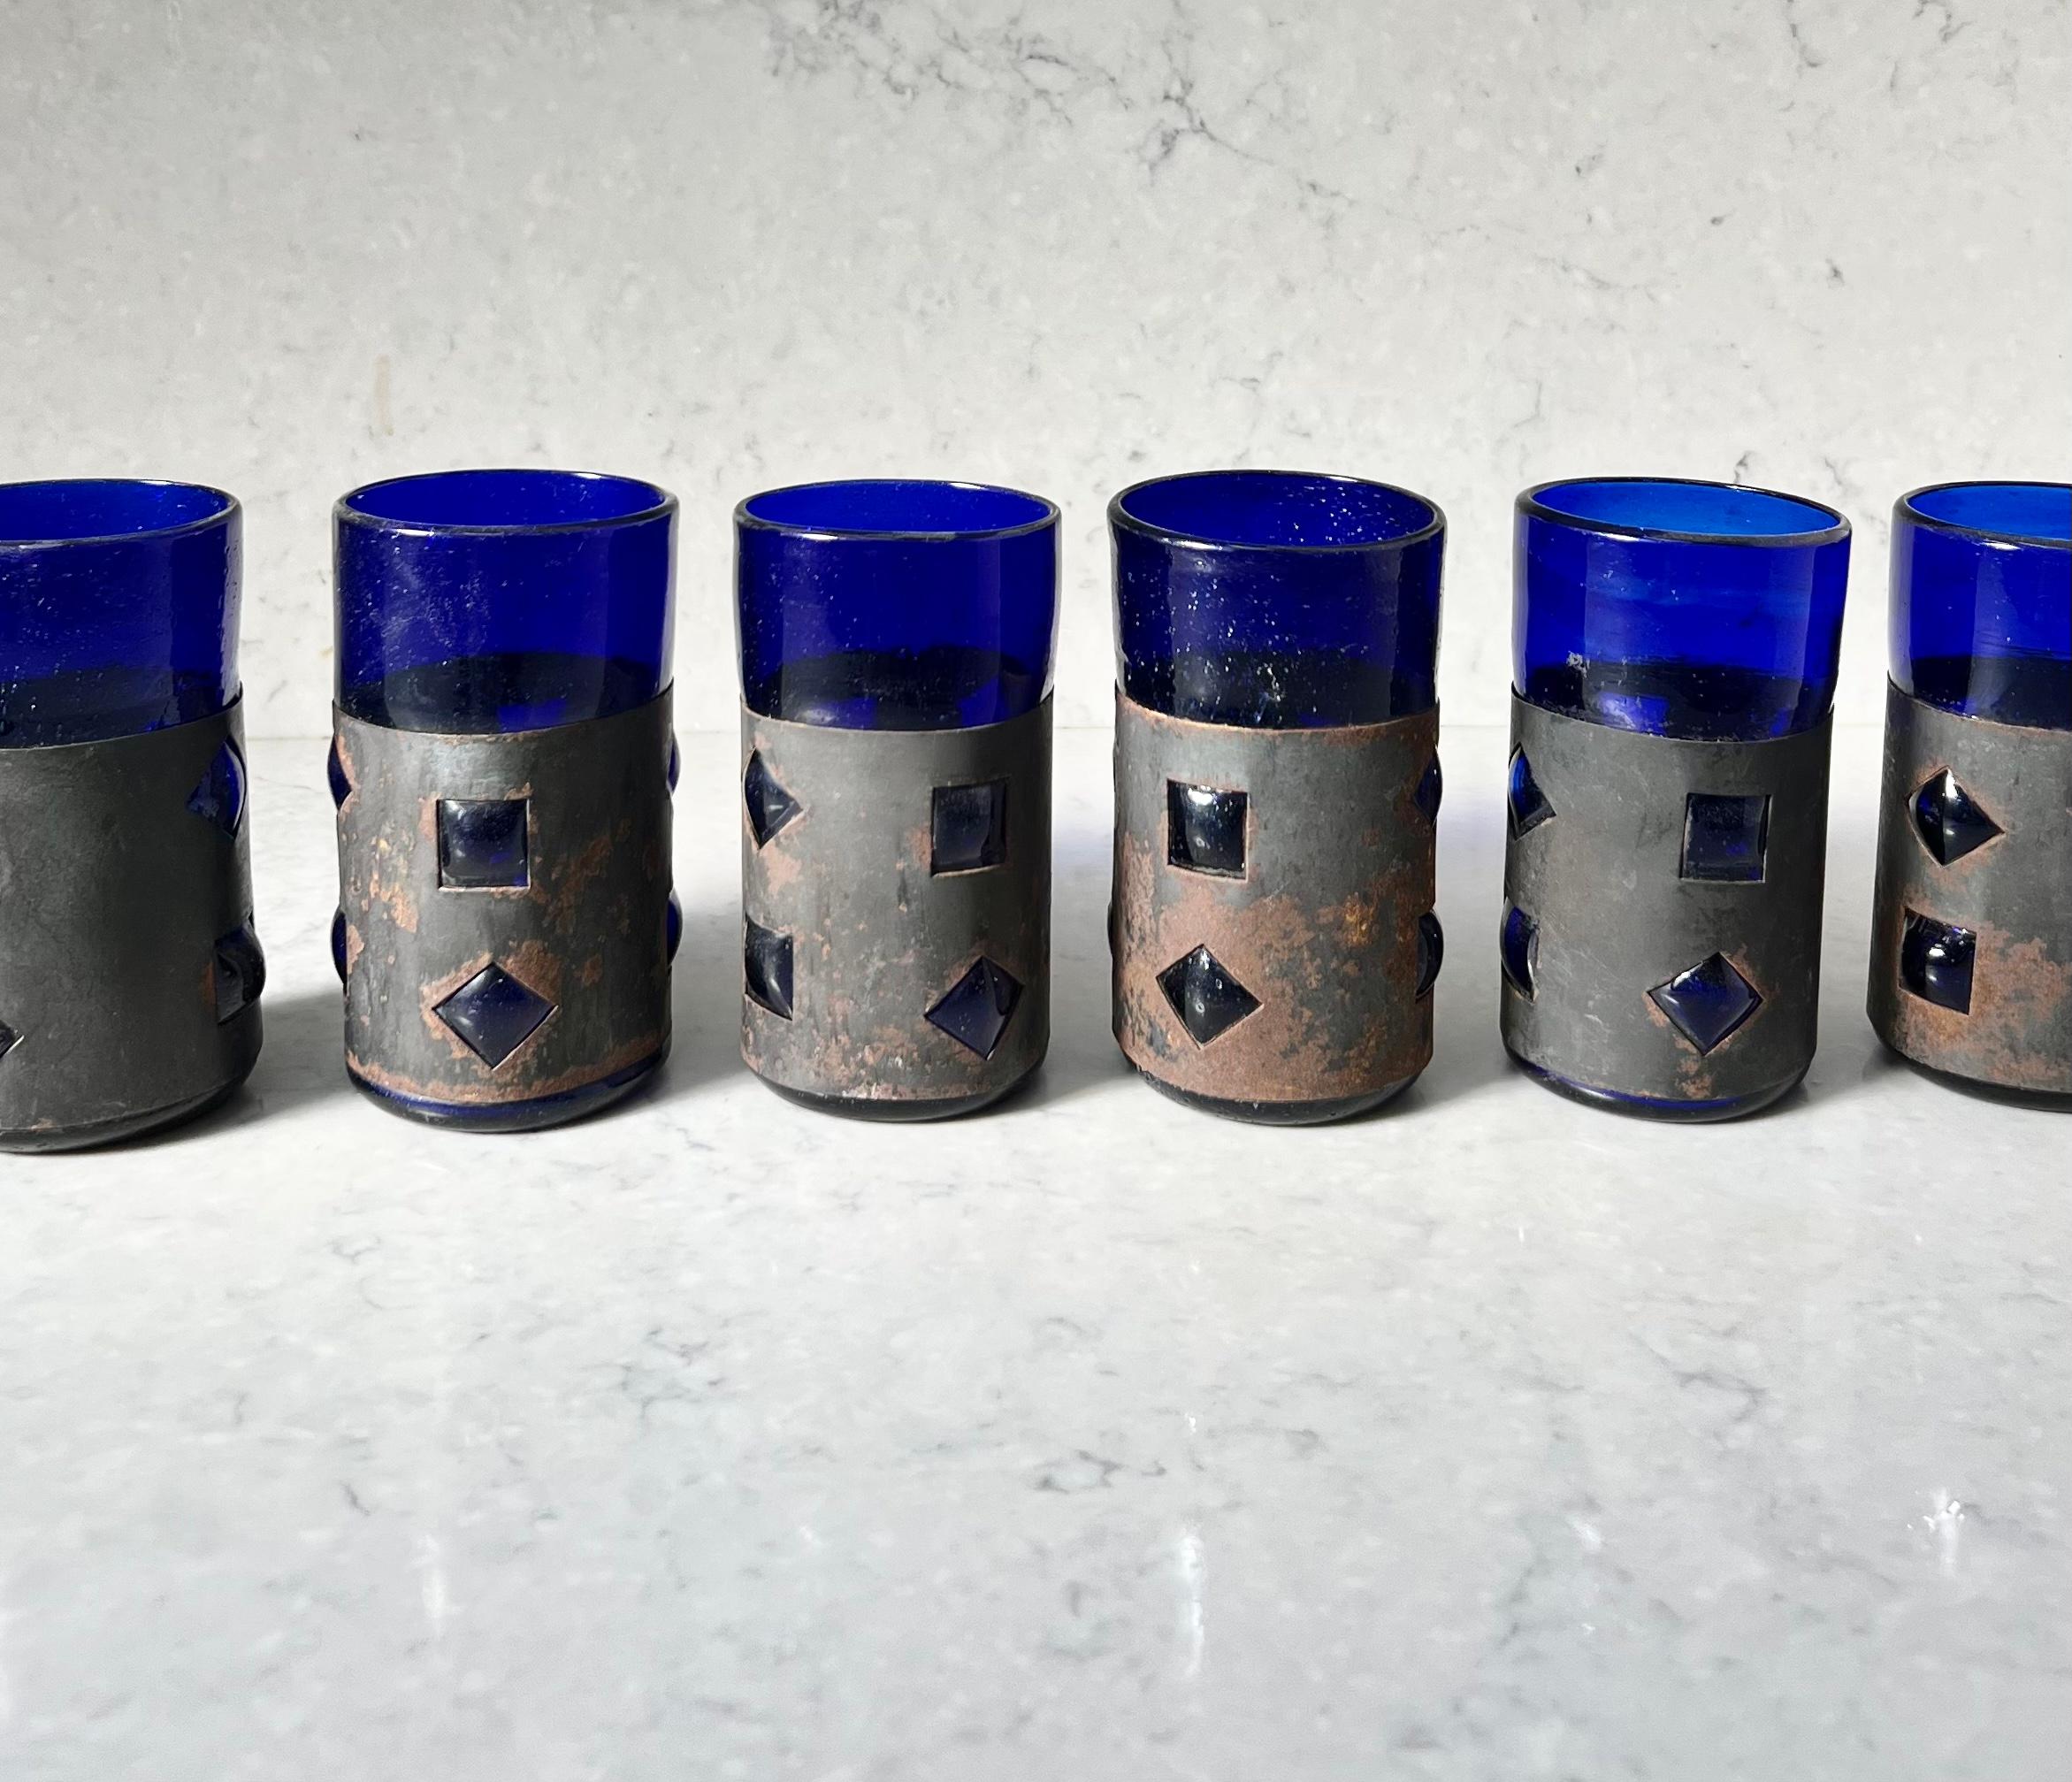 An artisan set of 6 brutalist Felipe Derflingher (aka Delfinger, as it is often mistakenly spelled) for Feders imprisoned cocktail glasses. Yves Klein Blue hand-blown thick art glass with oxidized metal overlays. Circa late 1960s or early 1970s.